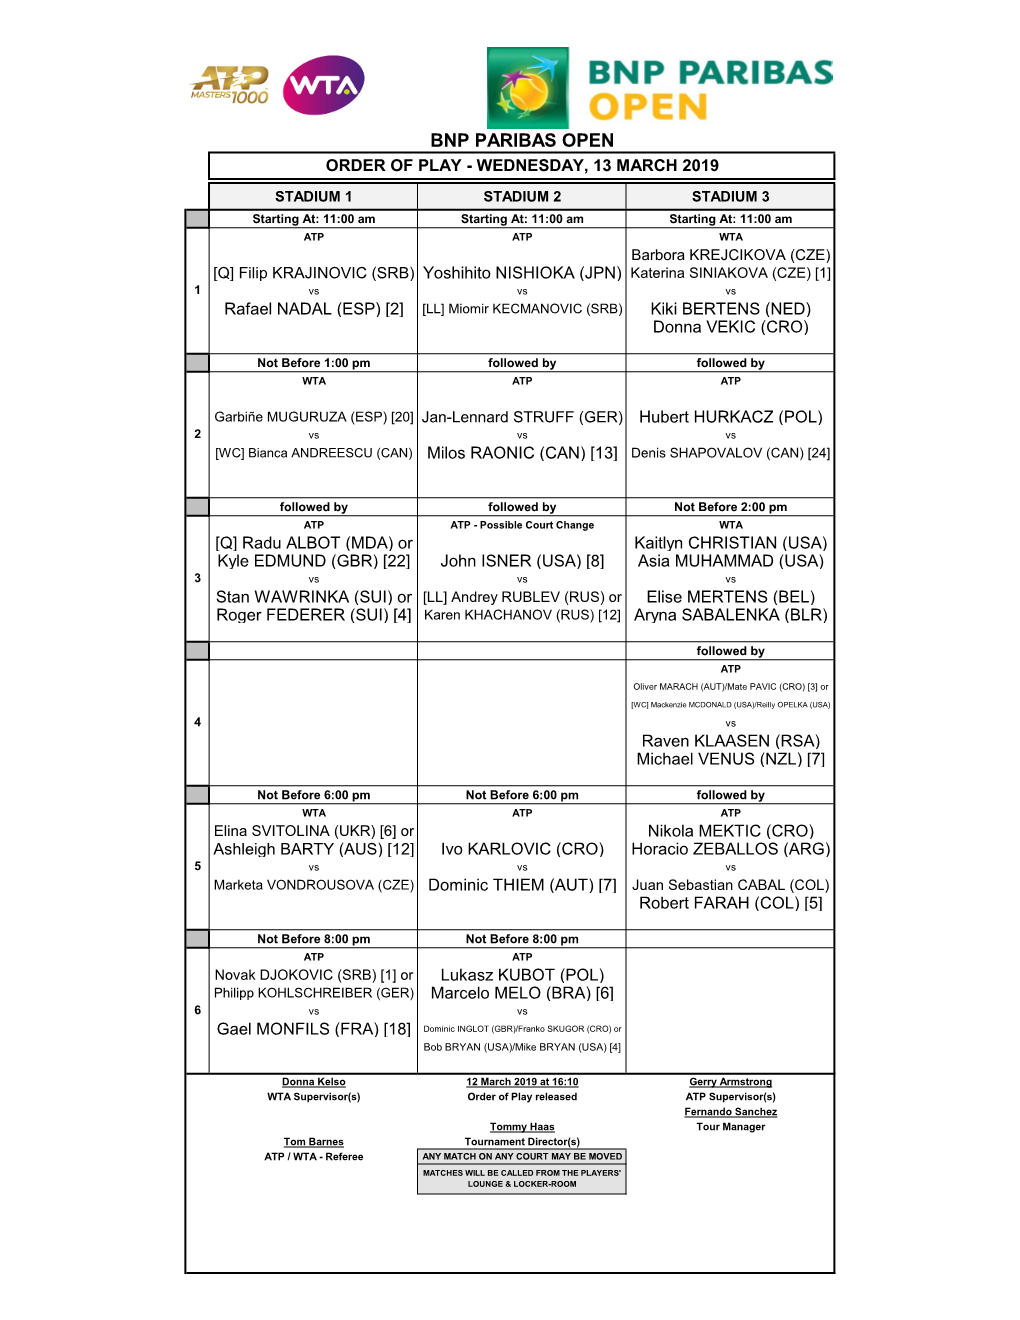 Bnp Paribas Open Order of Play - Wednesday, 13 March 2019